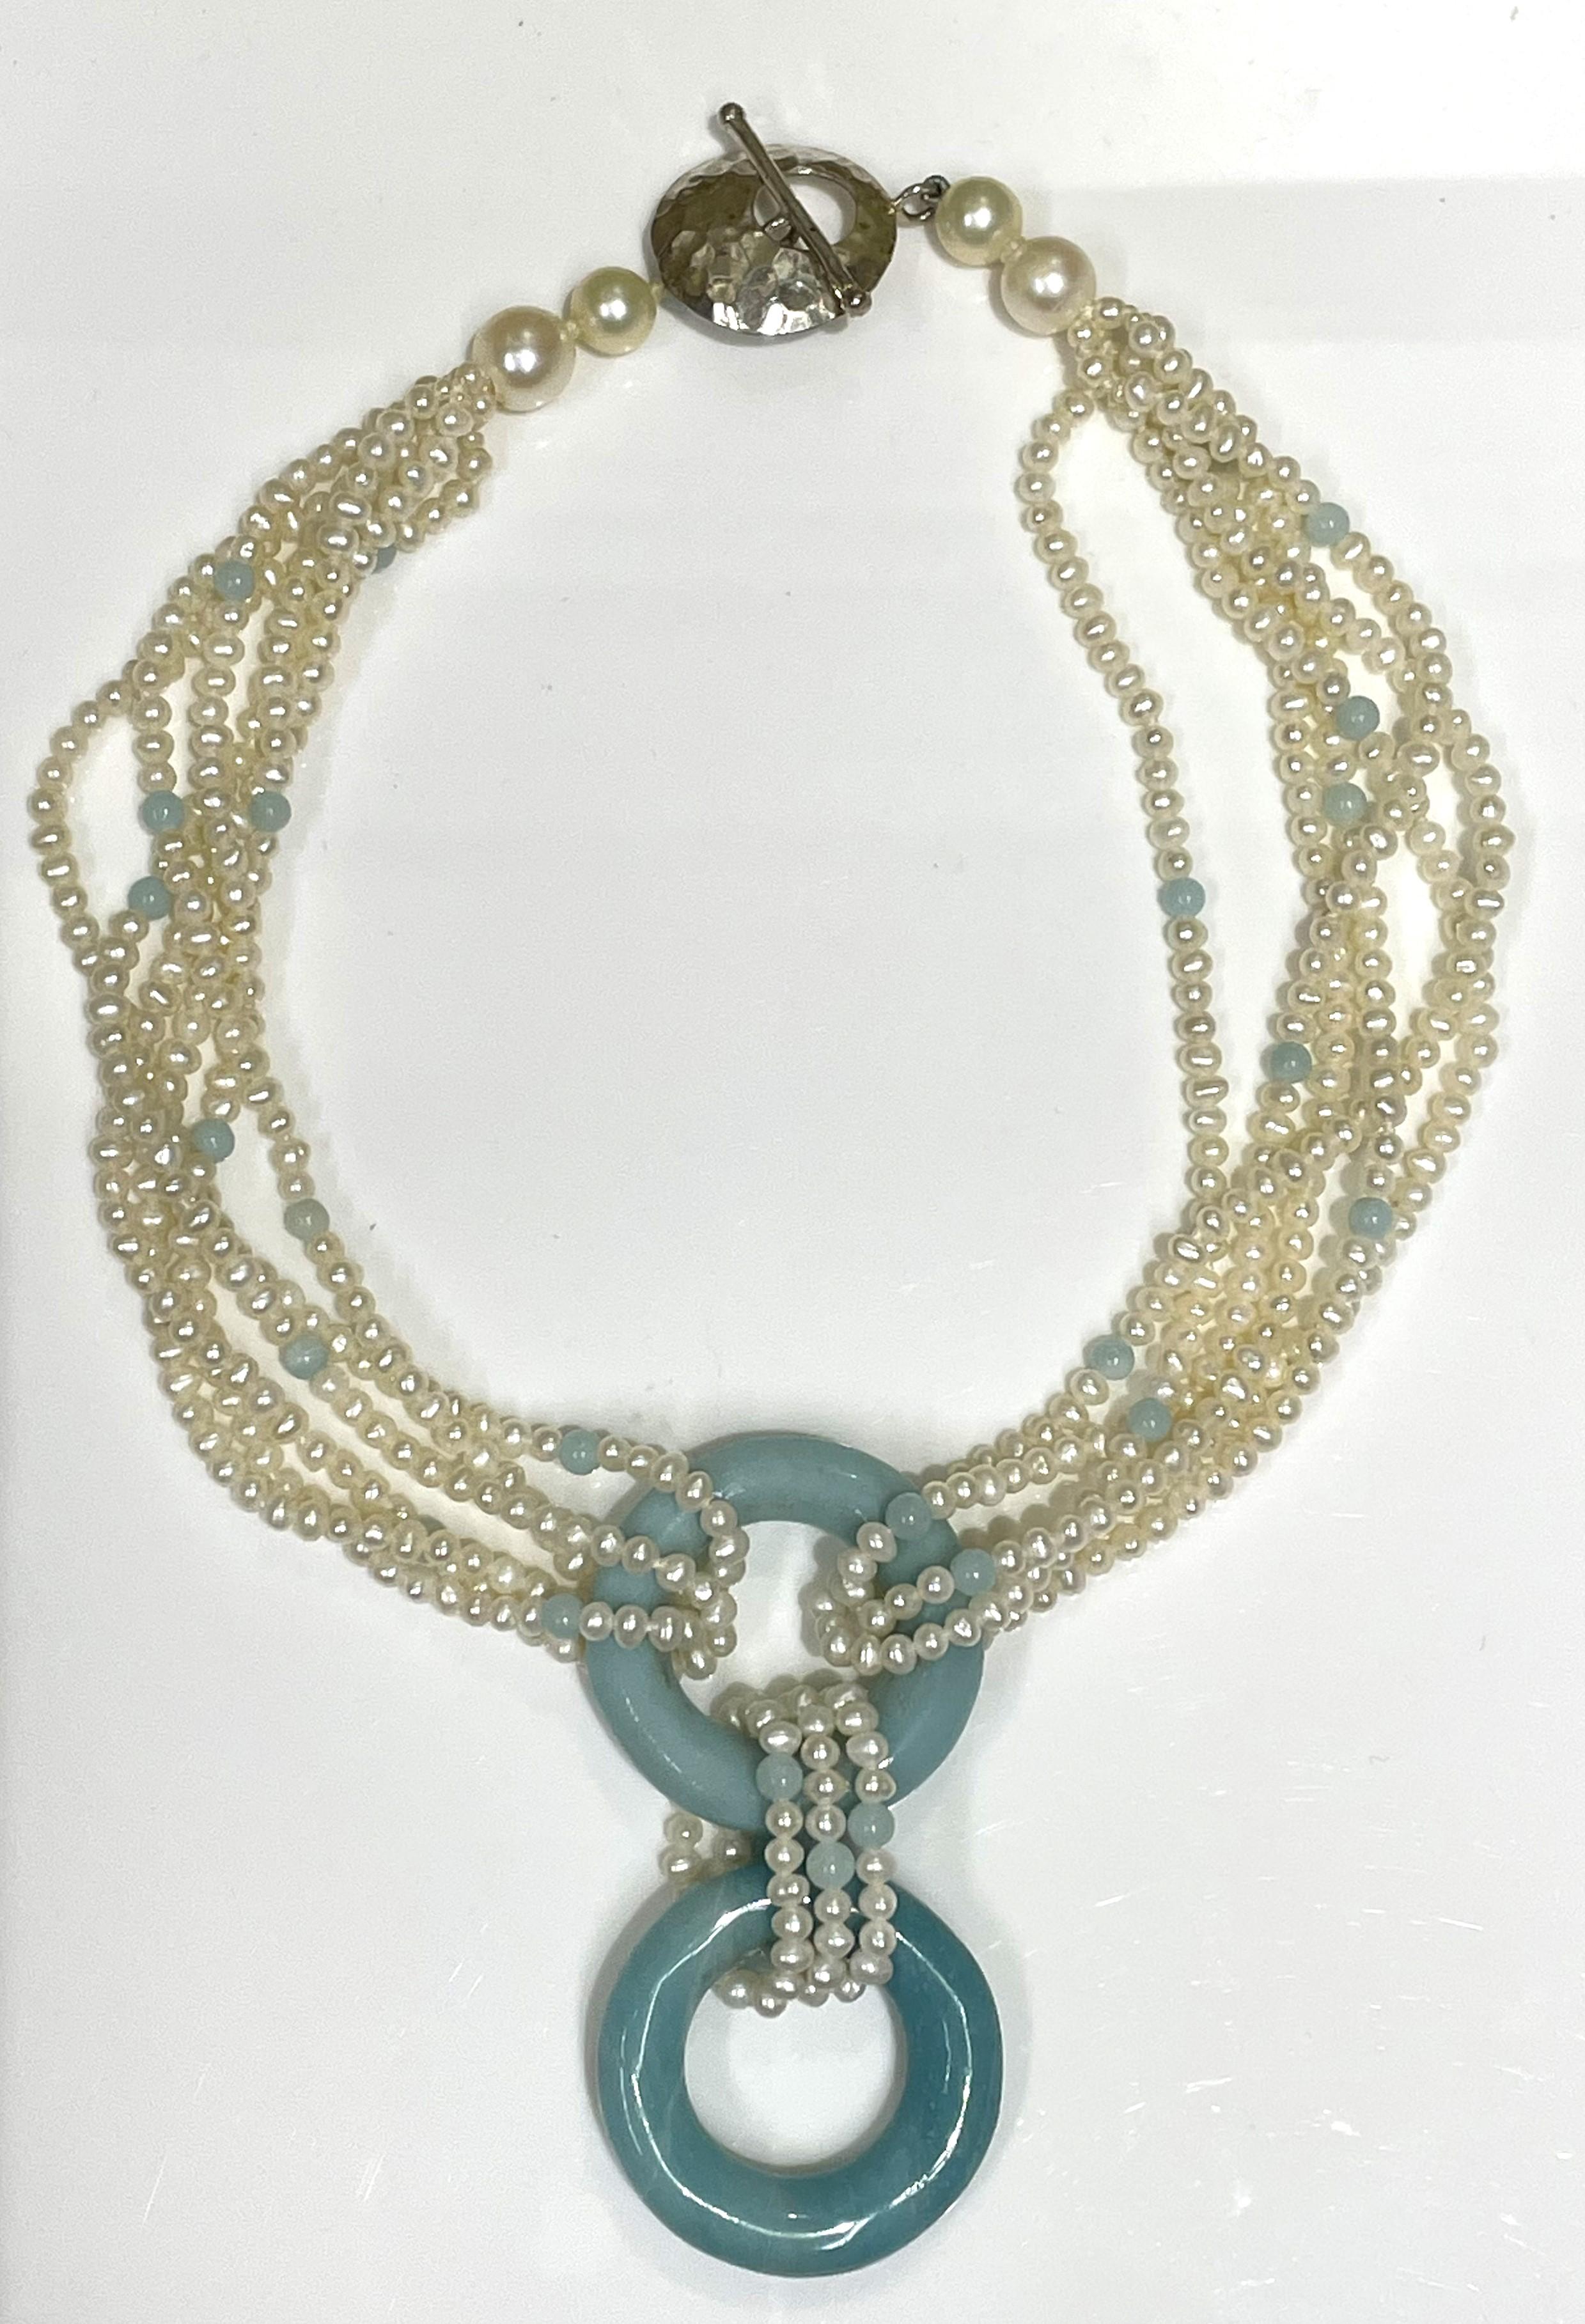 This one-of-a-kind piece will grab attention with any outfit!
6-strand freshwater pearl necklace with turquoise beads.  Center has two large turquoise, open circle pieces connected by pearl strands.  
Silver toggle clasp with hammered